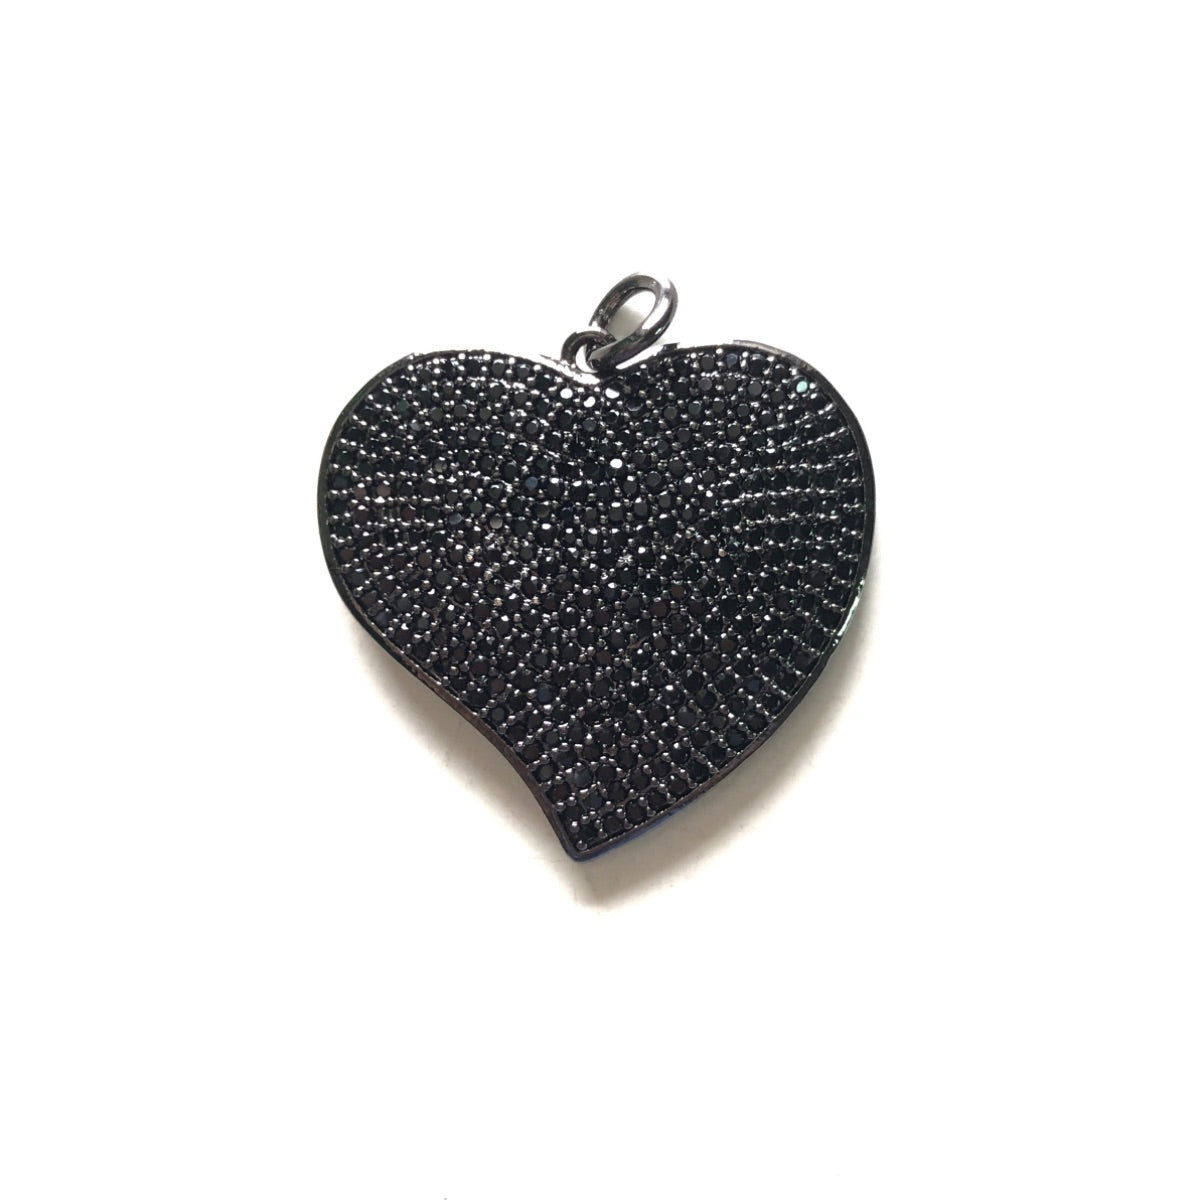 5pcs/lot 28.5*27mm Large Size CZ Paved Heart Charms Black on Black CZ Paved Charms Hearts Large Sizes New Charms Arrivals Charms Beads Beyond